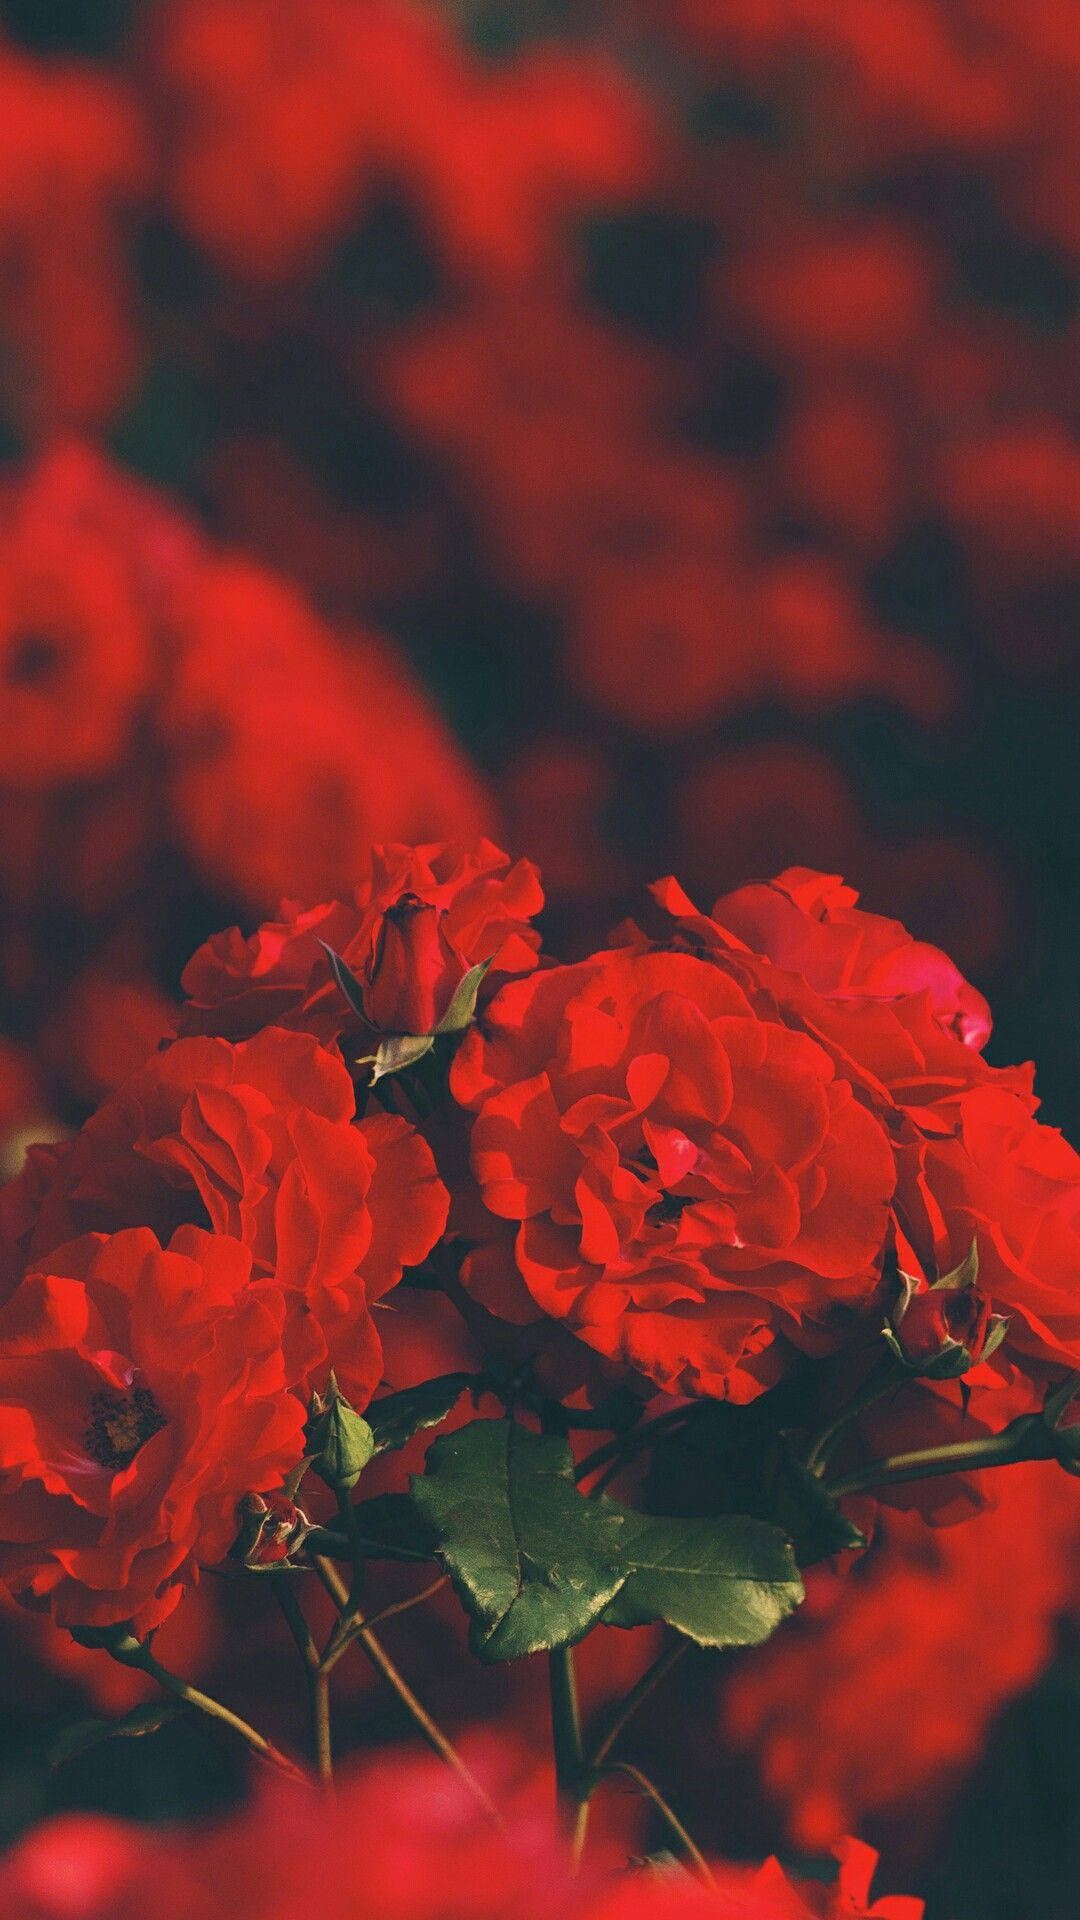 Free Red Aesthetic iPhone Wallpaper Downloads, Red Aesthetic iPhone Wallpaper for FREE